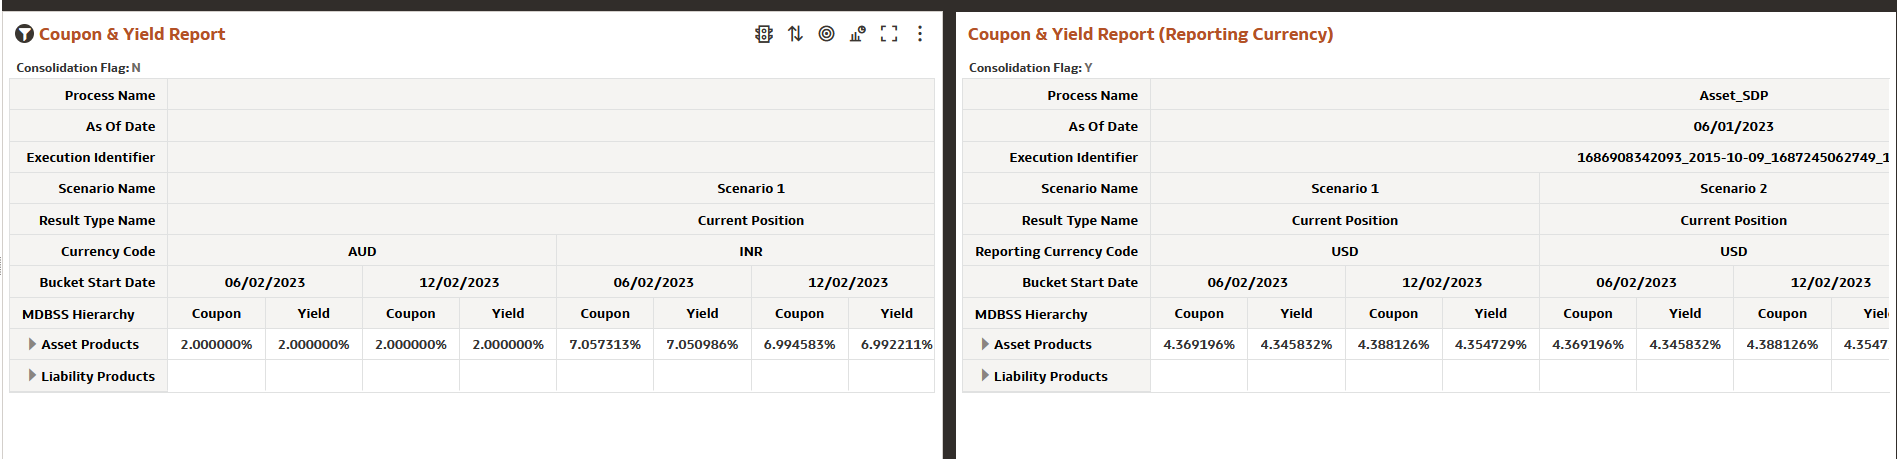 Financial Results MDBSS (Coupon & Yield) Report